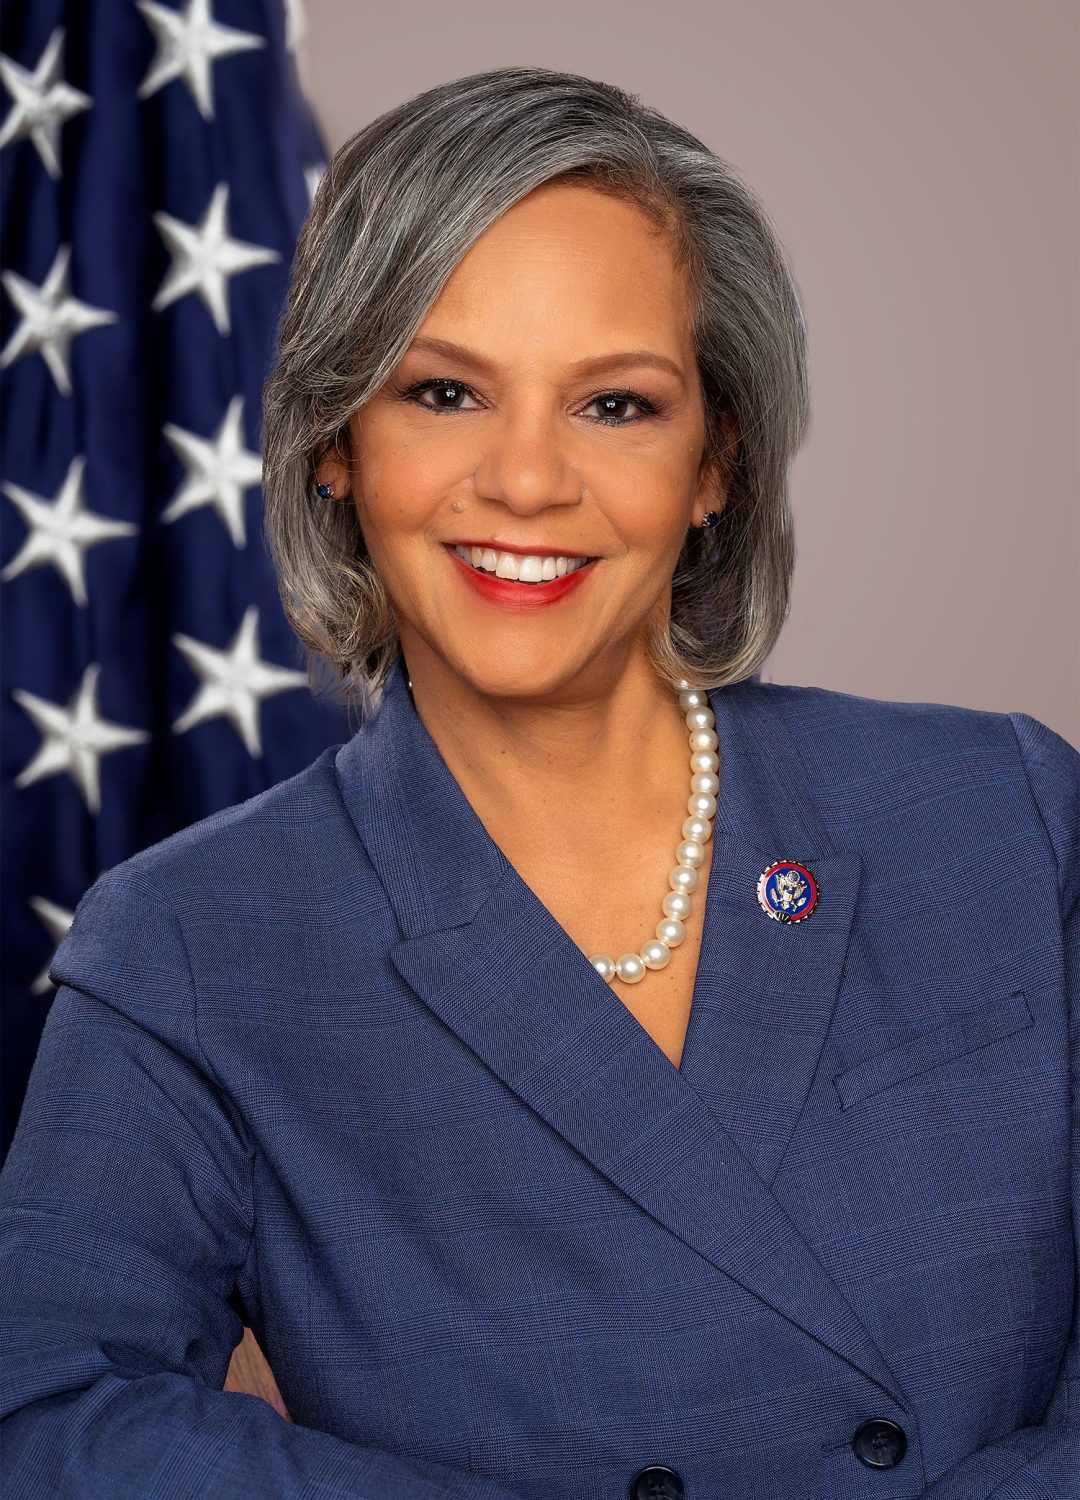 photo of Rep. Robin Kelly in front of American flag